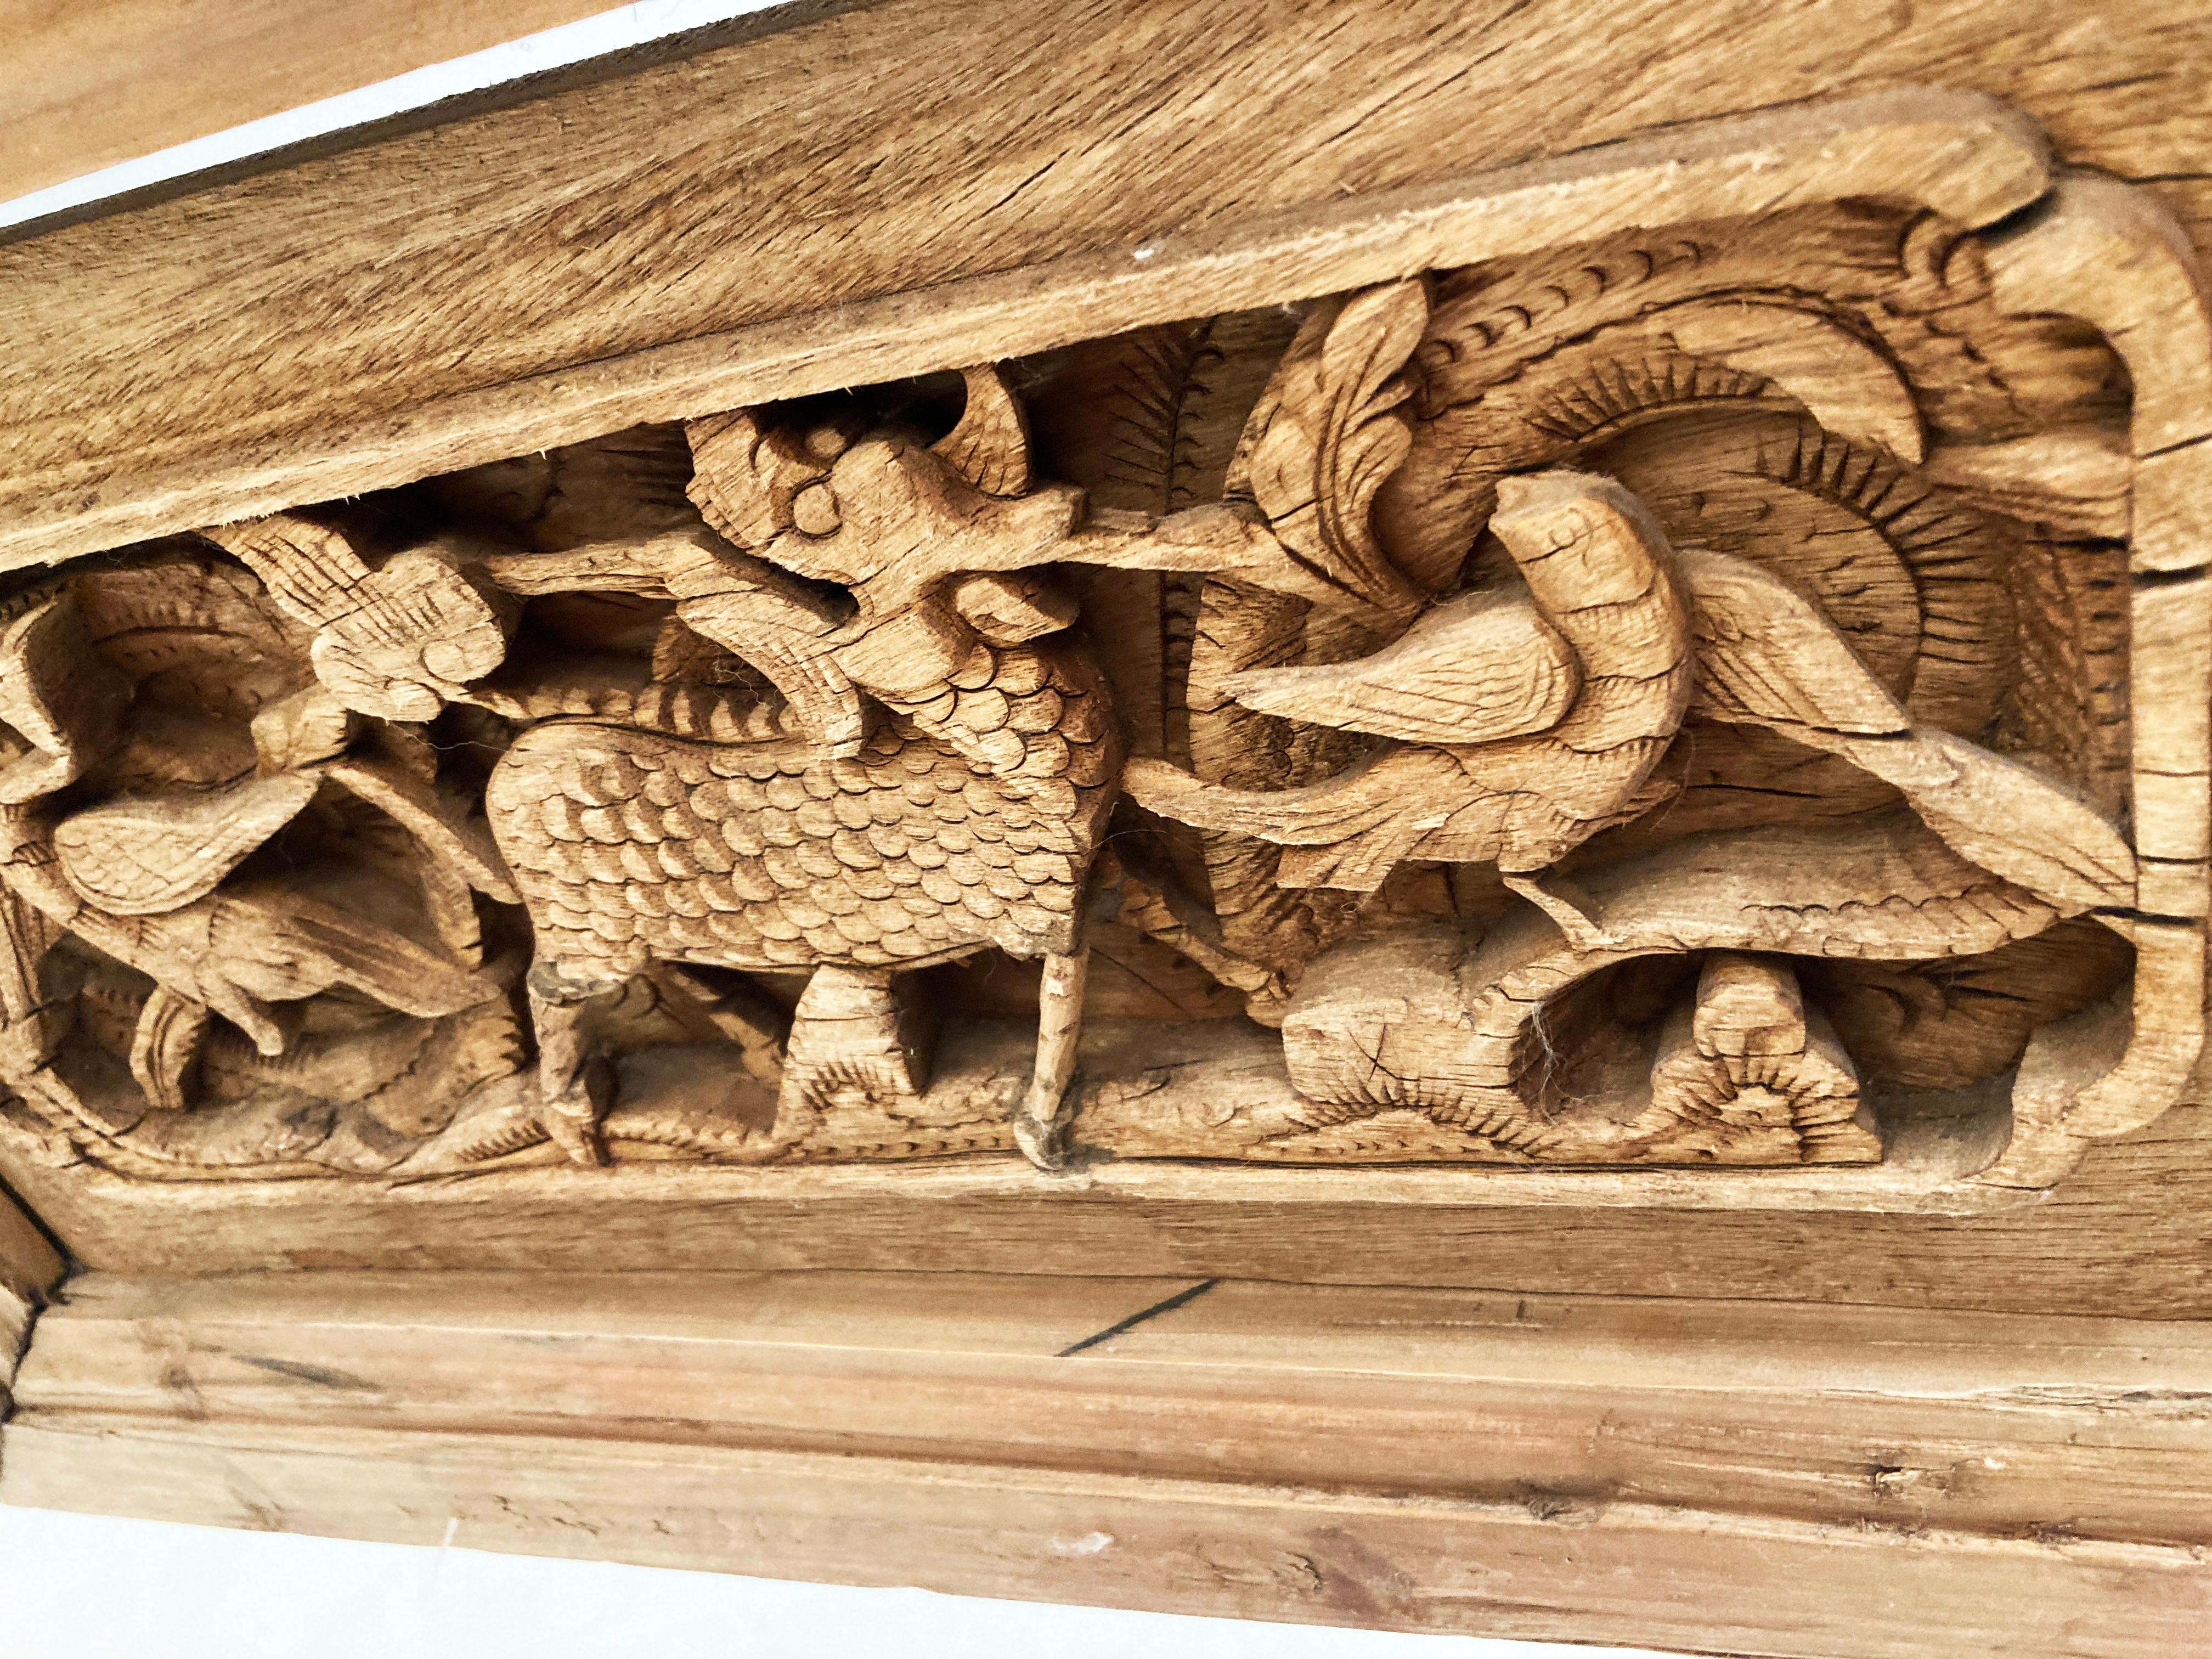 Late 18th C. Chinese Wooden Hand-carved Panels From the Qing Dynasty - a Pair For Sale 1